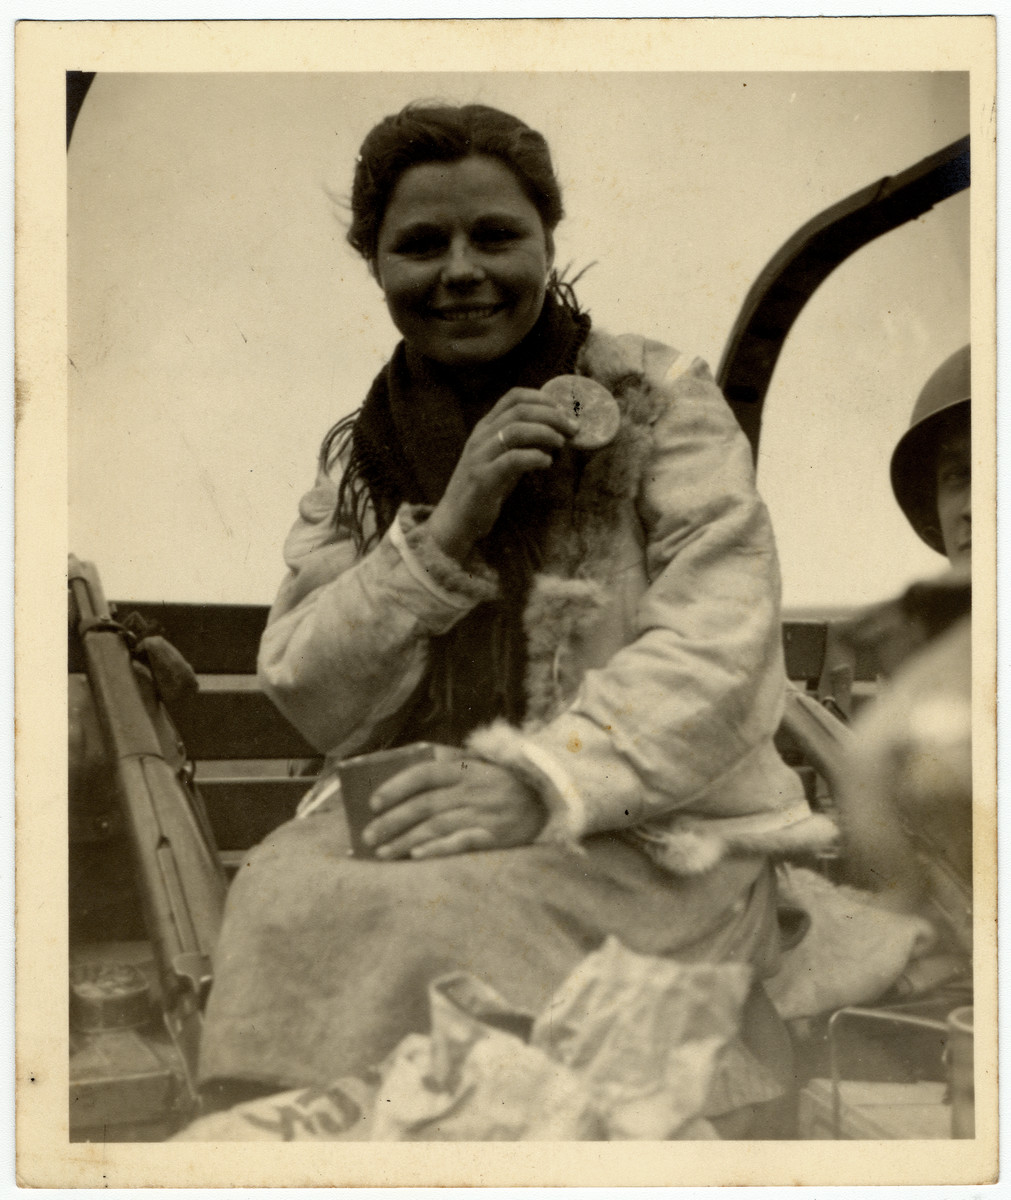 Close-up portrait of a newly liberated, female, Russian slave laborer eating American rations.

The original caption reads: "Russian Slave Labor: First delicacy since internment.  Our much disliked "C" rations.  Liberation was sweet.  Notice she got one of our fur jackets".